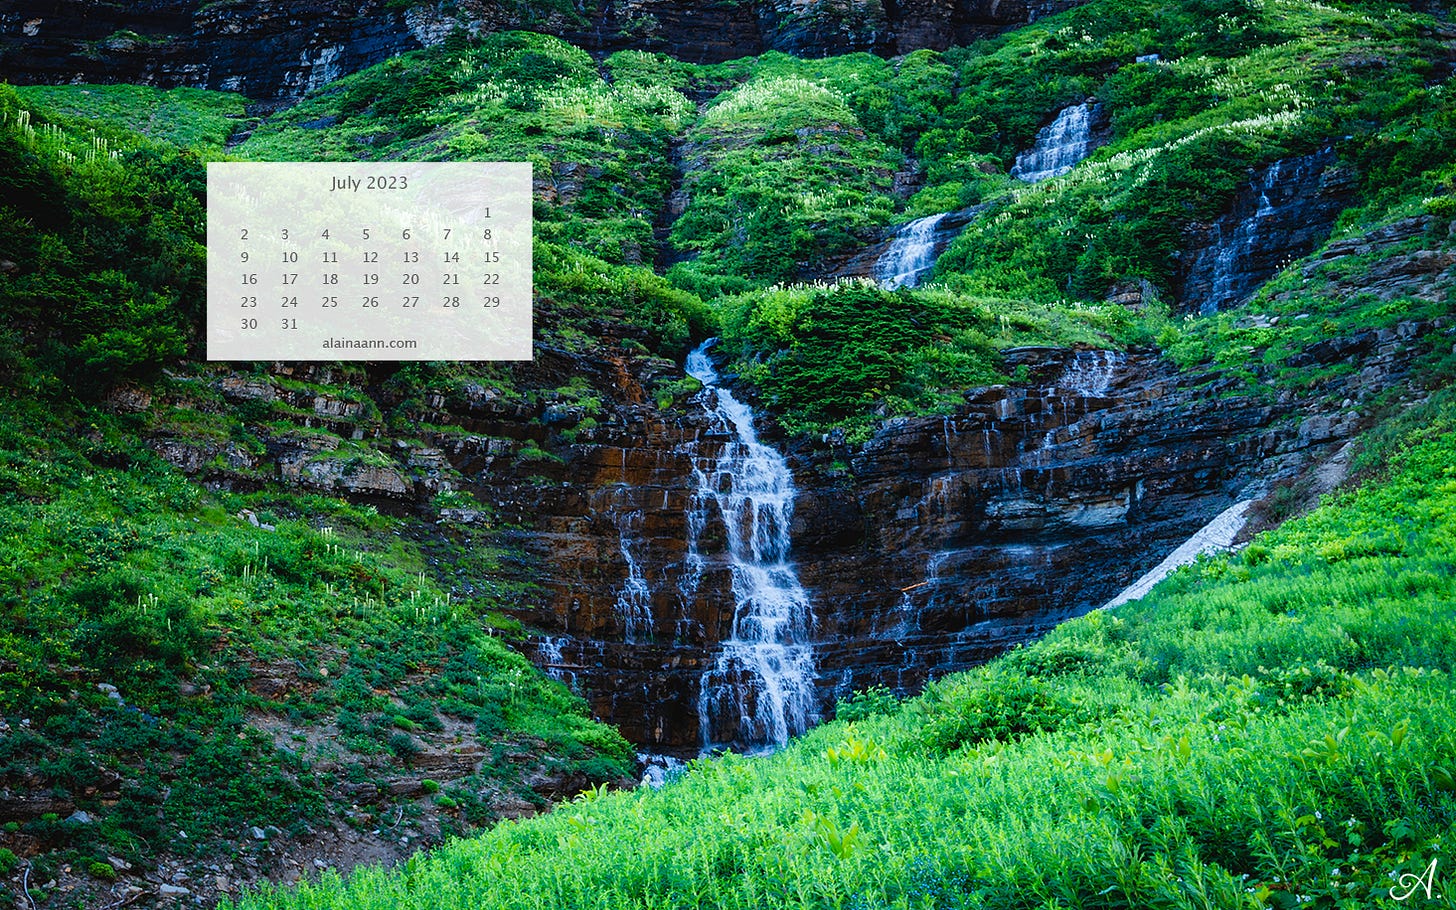 A tiny waterfall cascading over lush green vegetation and rocks. A July 2023 calendar is overlayed in the top left corner.